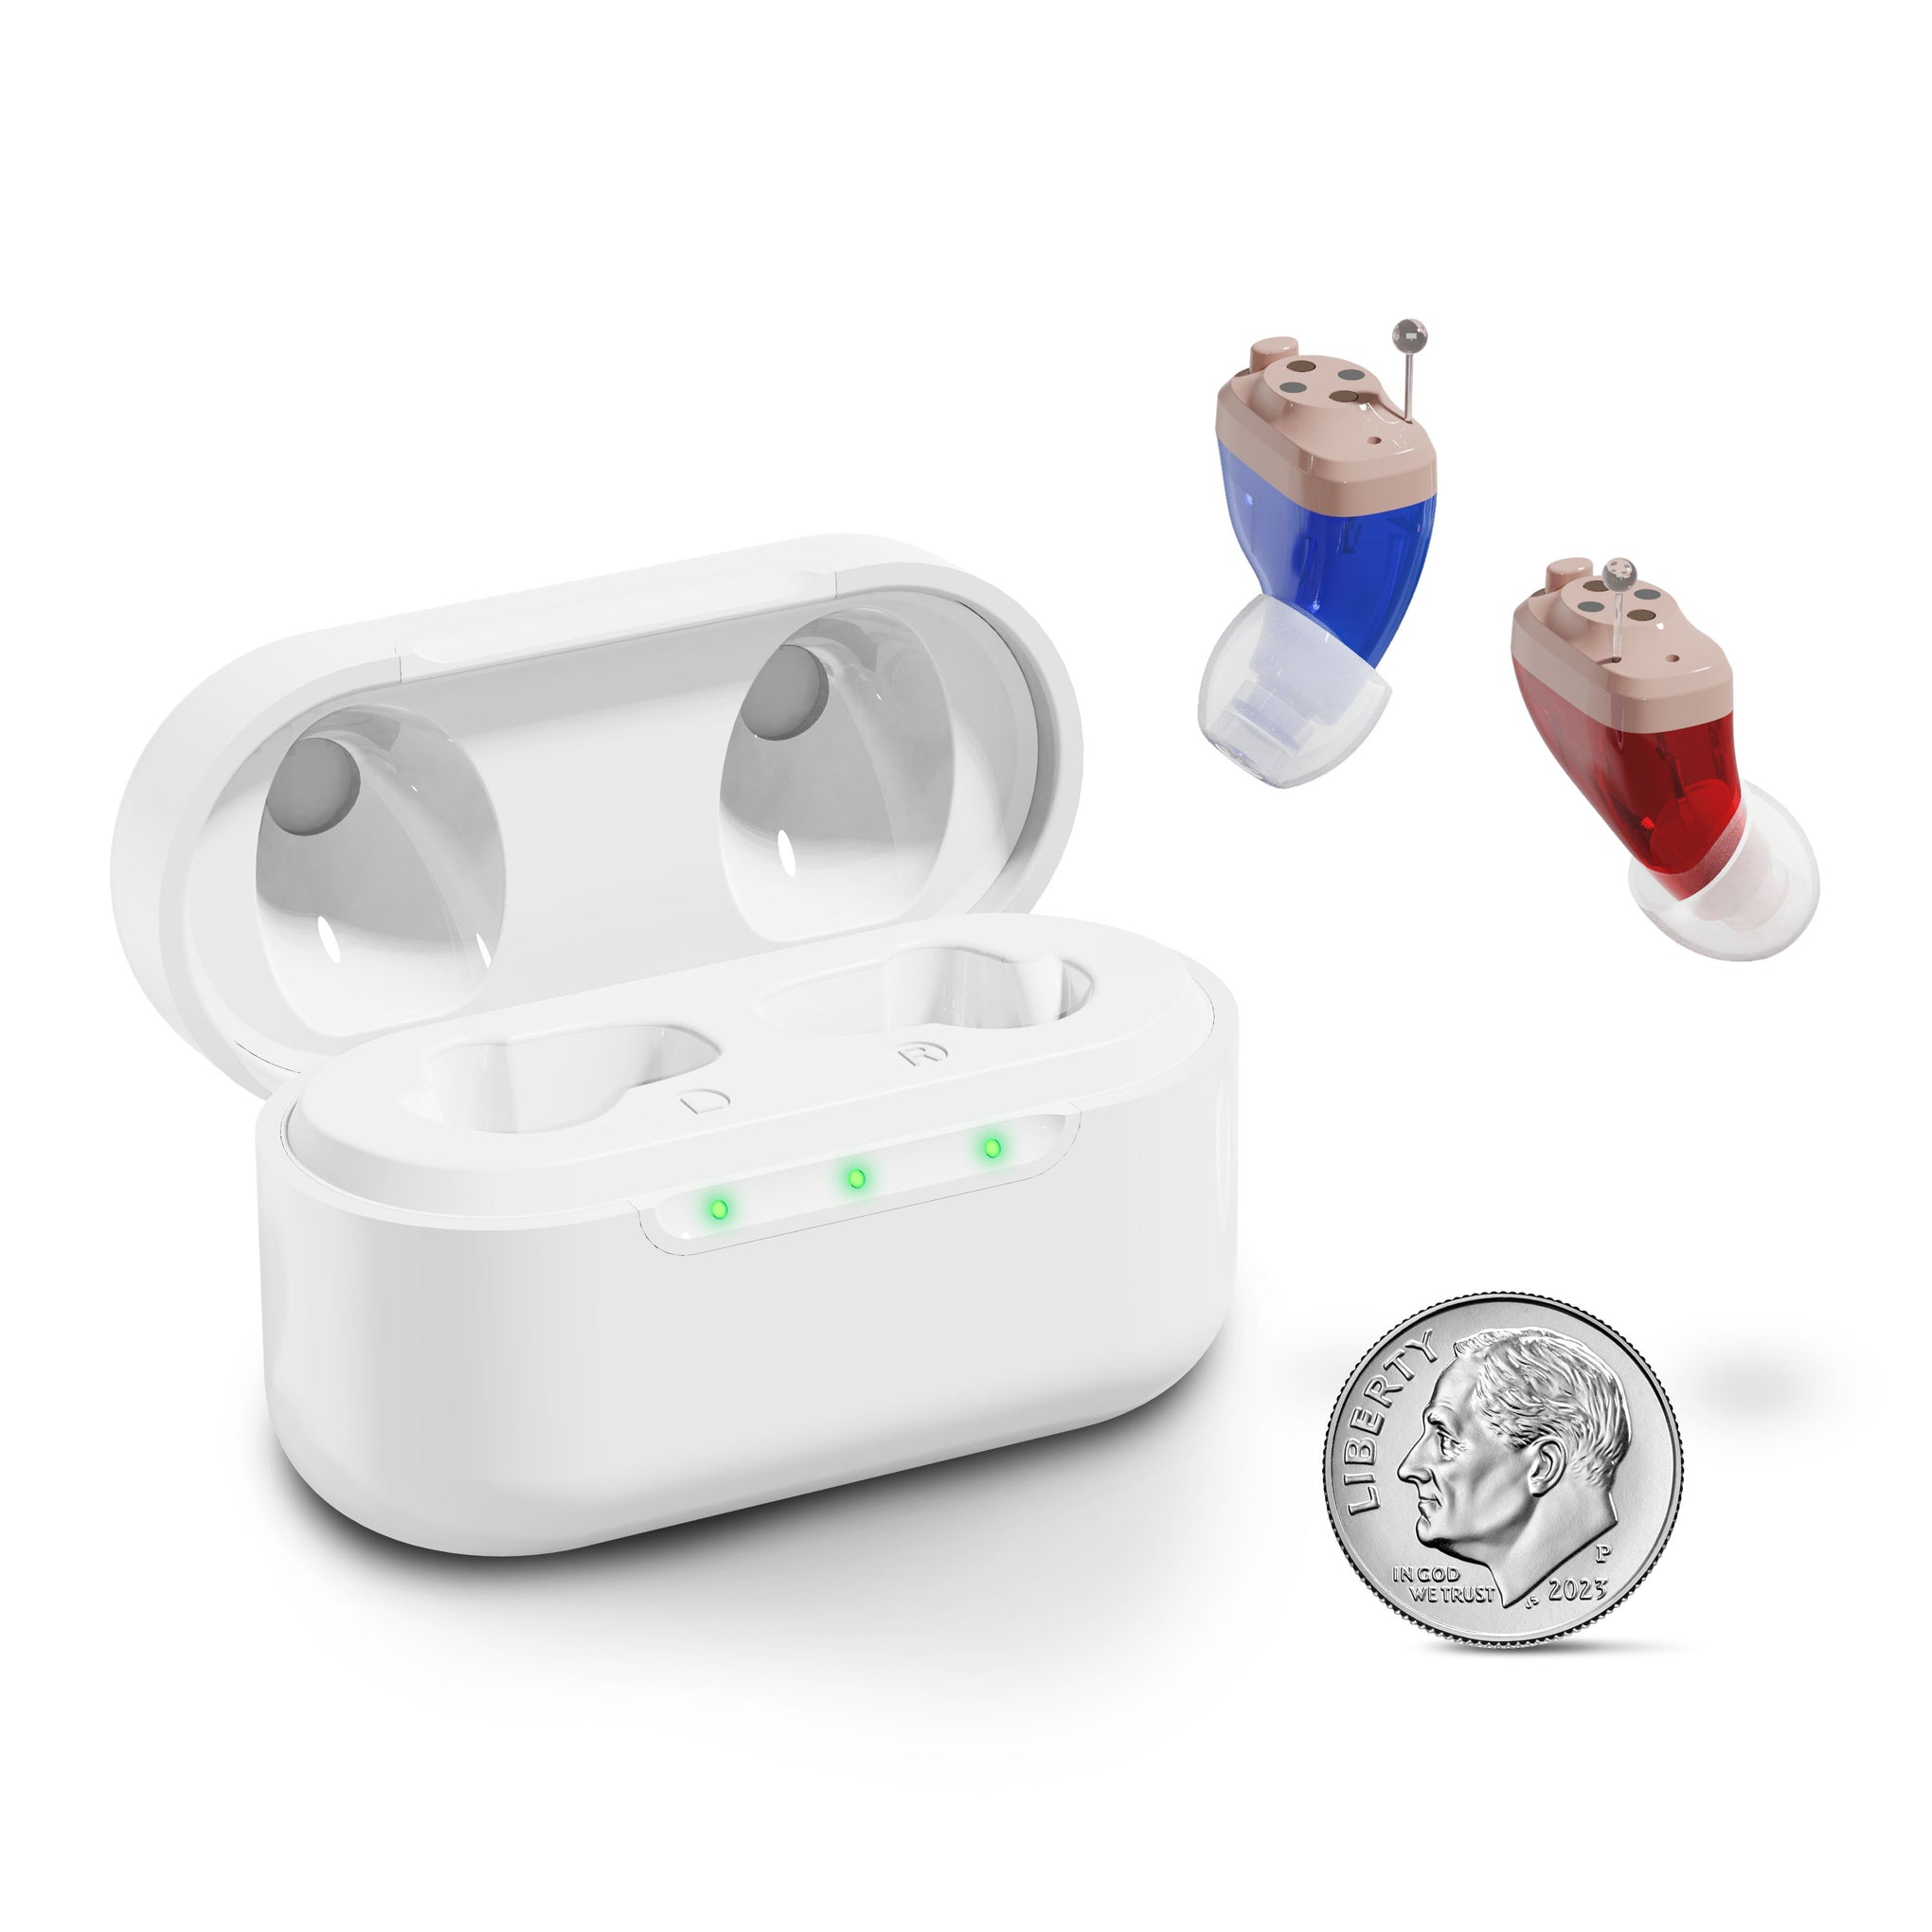 The RCA Hearing Aid In-Ear Canal Design w/ Charging Case